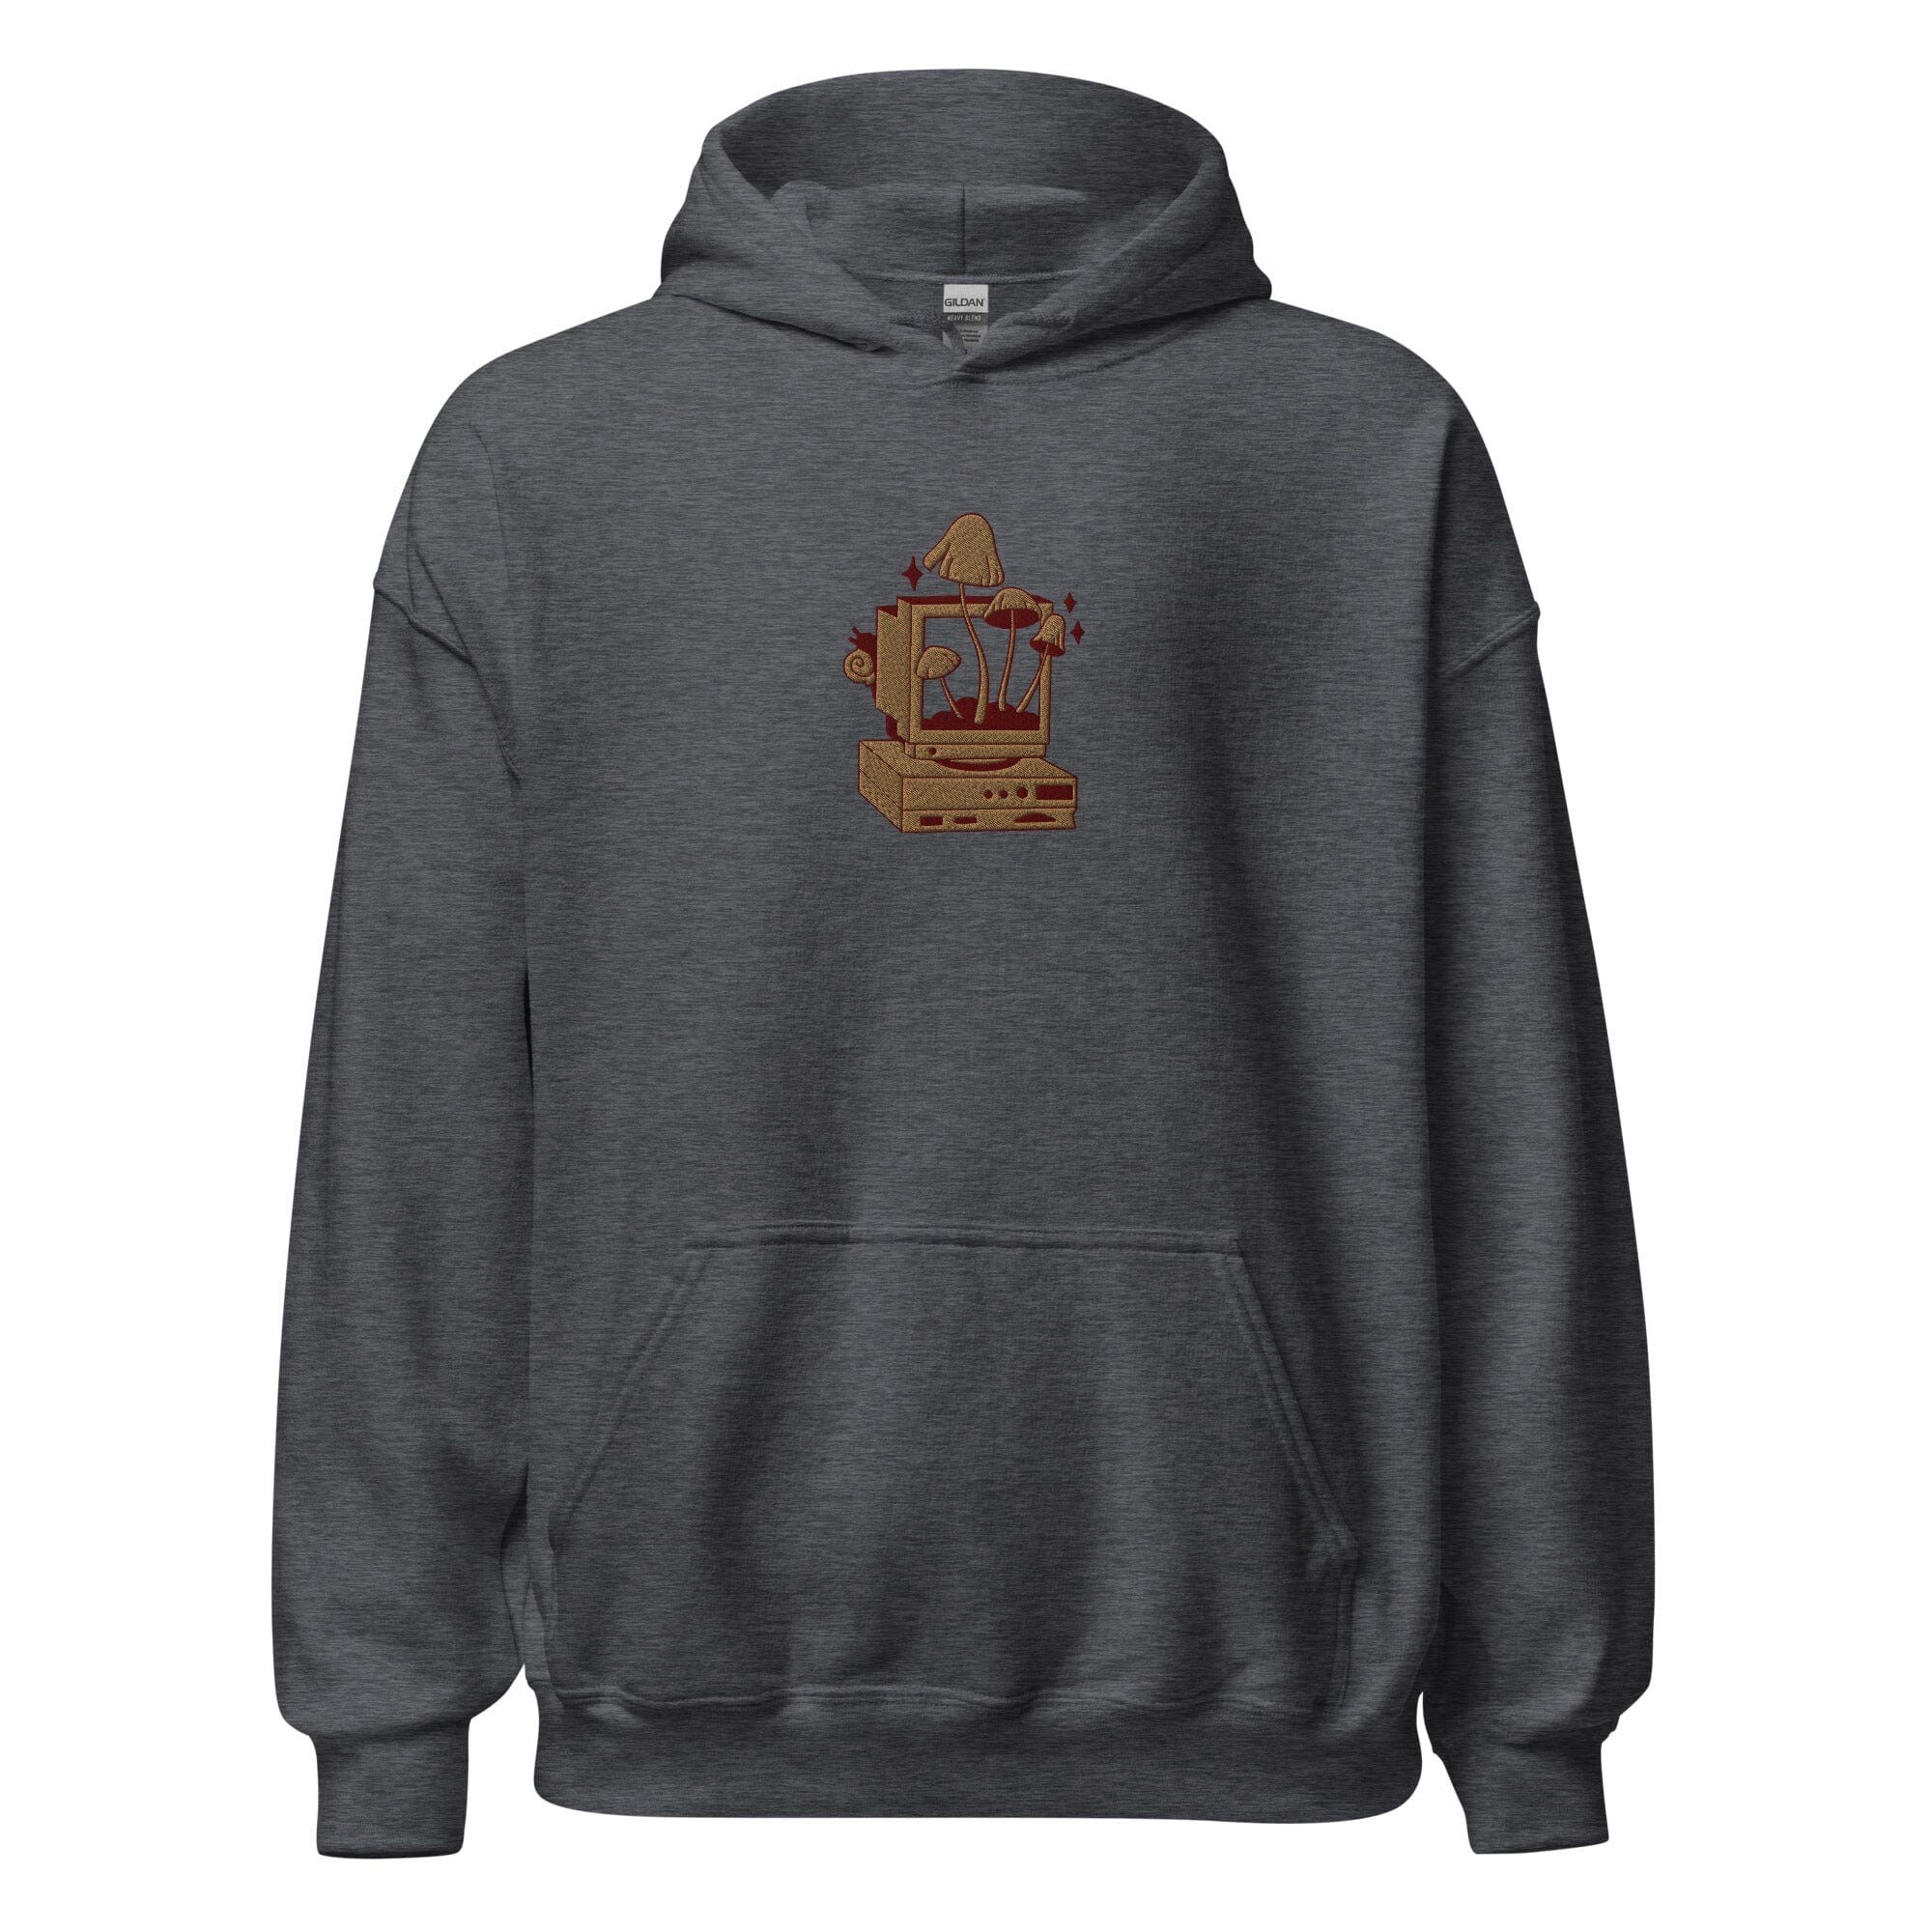 Cozy PC Gaming | Embroidered Unisex Hoodie | Cozy Gamer Threads & Thistles Inventory Dark Heather S 